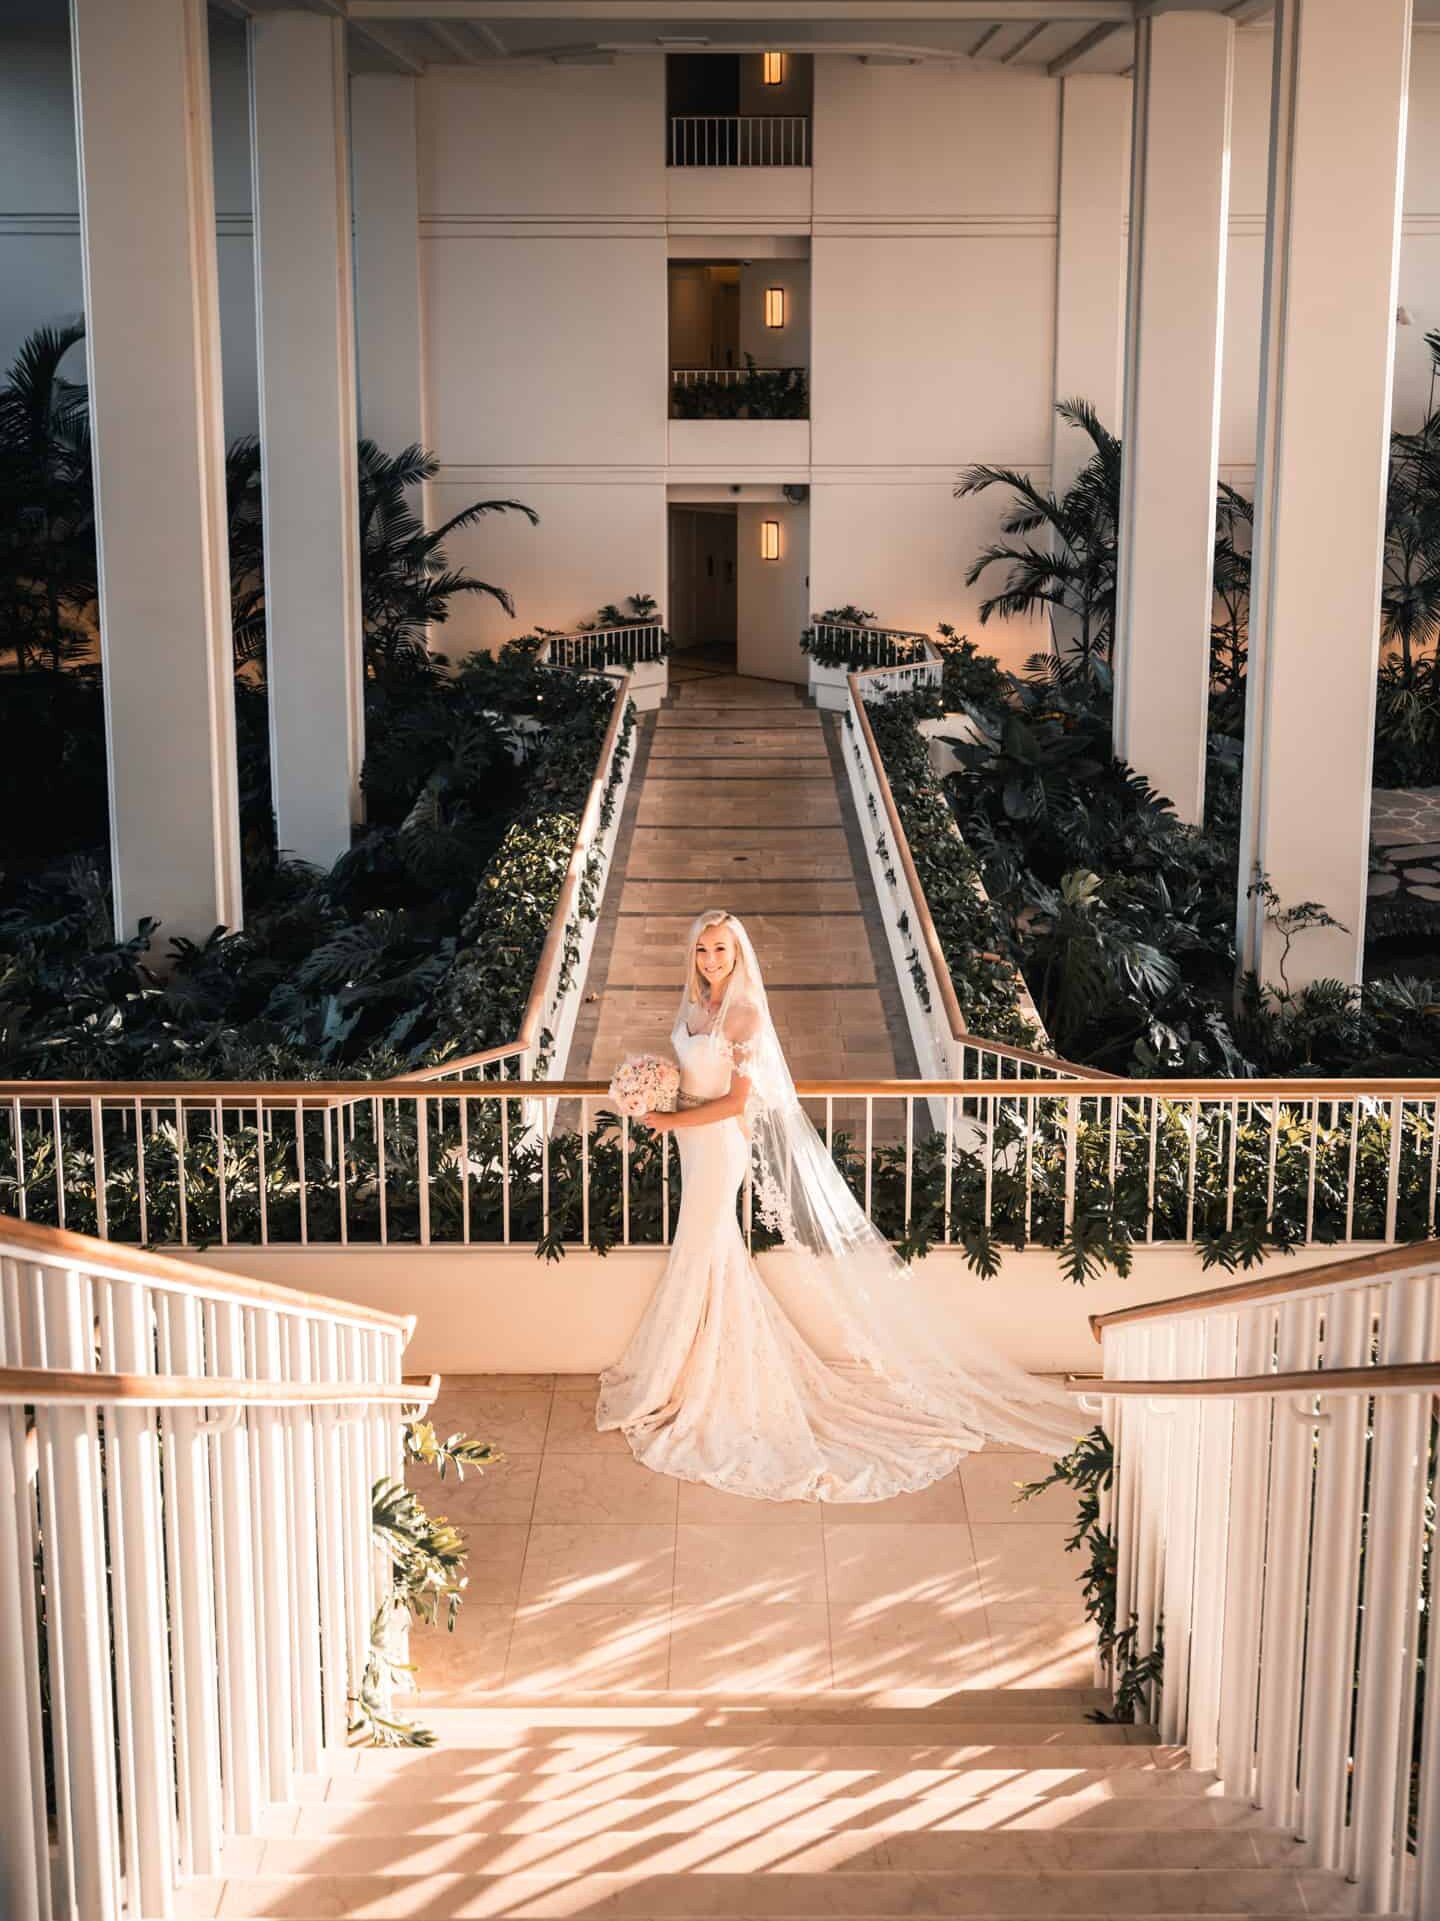 Bride in a detailed lace wedding dress and flowing veil holding a bouquet, posing on a grand staircase with lush greenery and white architectural columns at a luxurious Hawaiian resort, as the warm sunset light enhances the romantic atmosphere